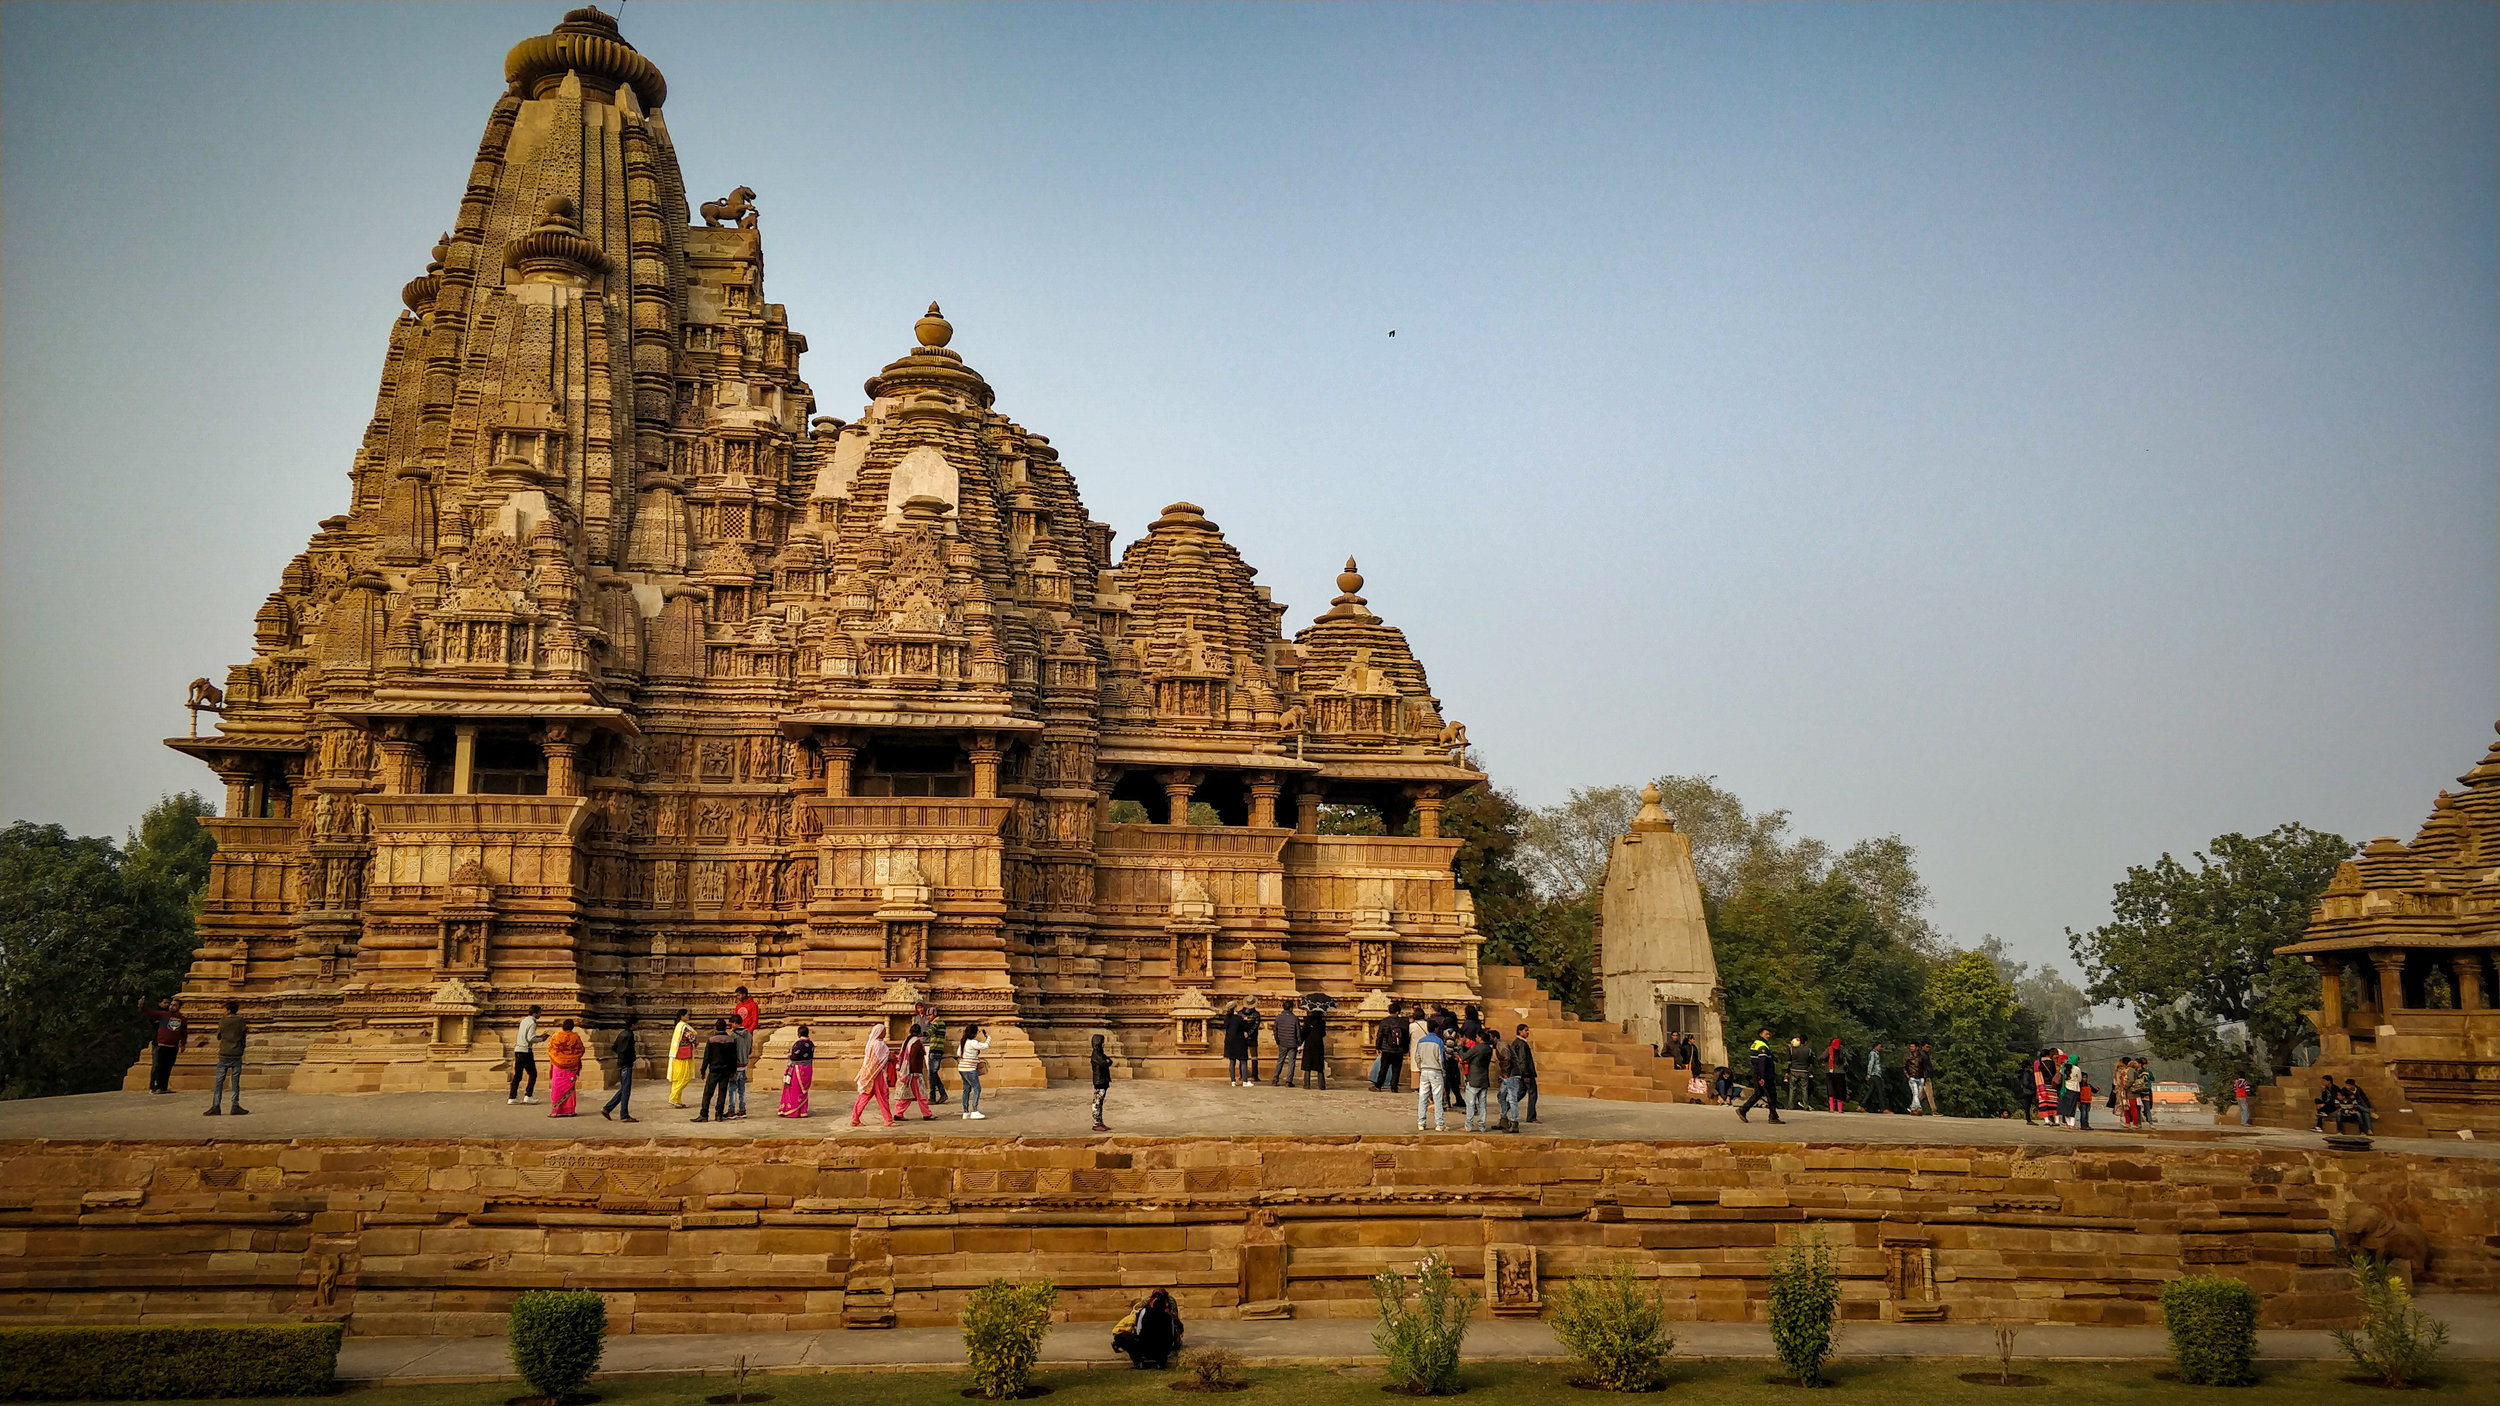  The Western group of temples instills a sense of calm and awe with its sheer magnificence and scale. 